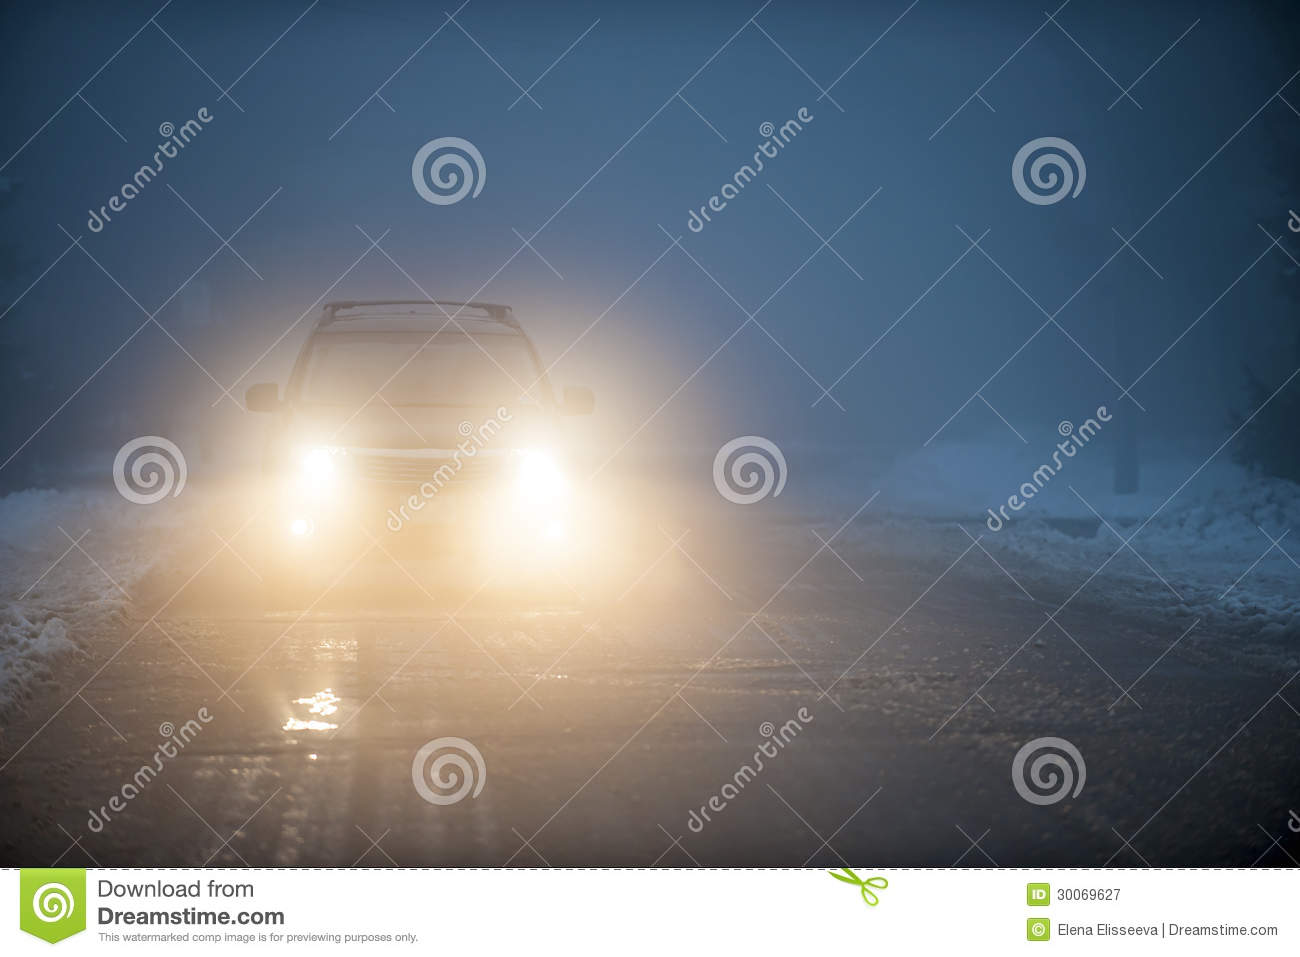 Headlights Of Car Driving In Fog Royalty Free Stock Photography